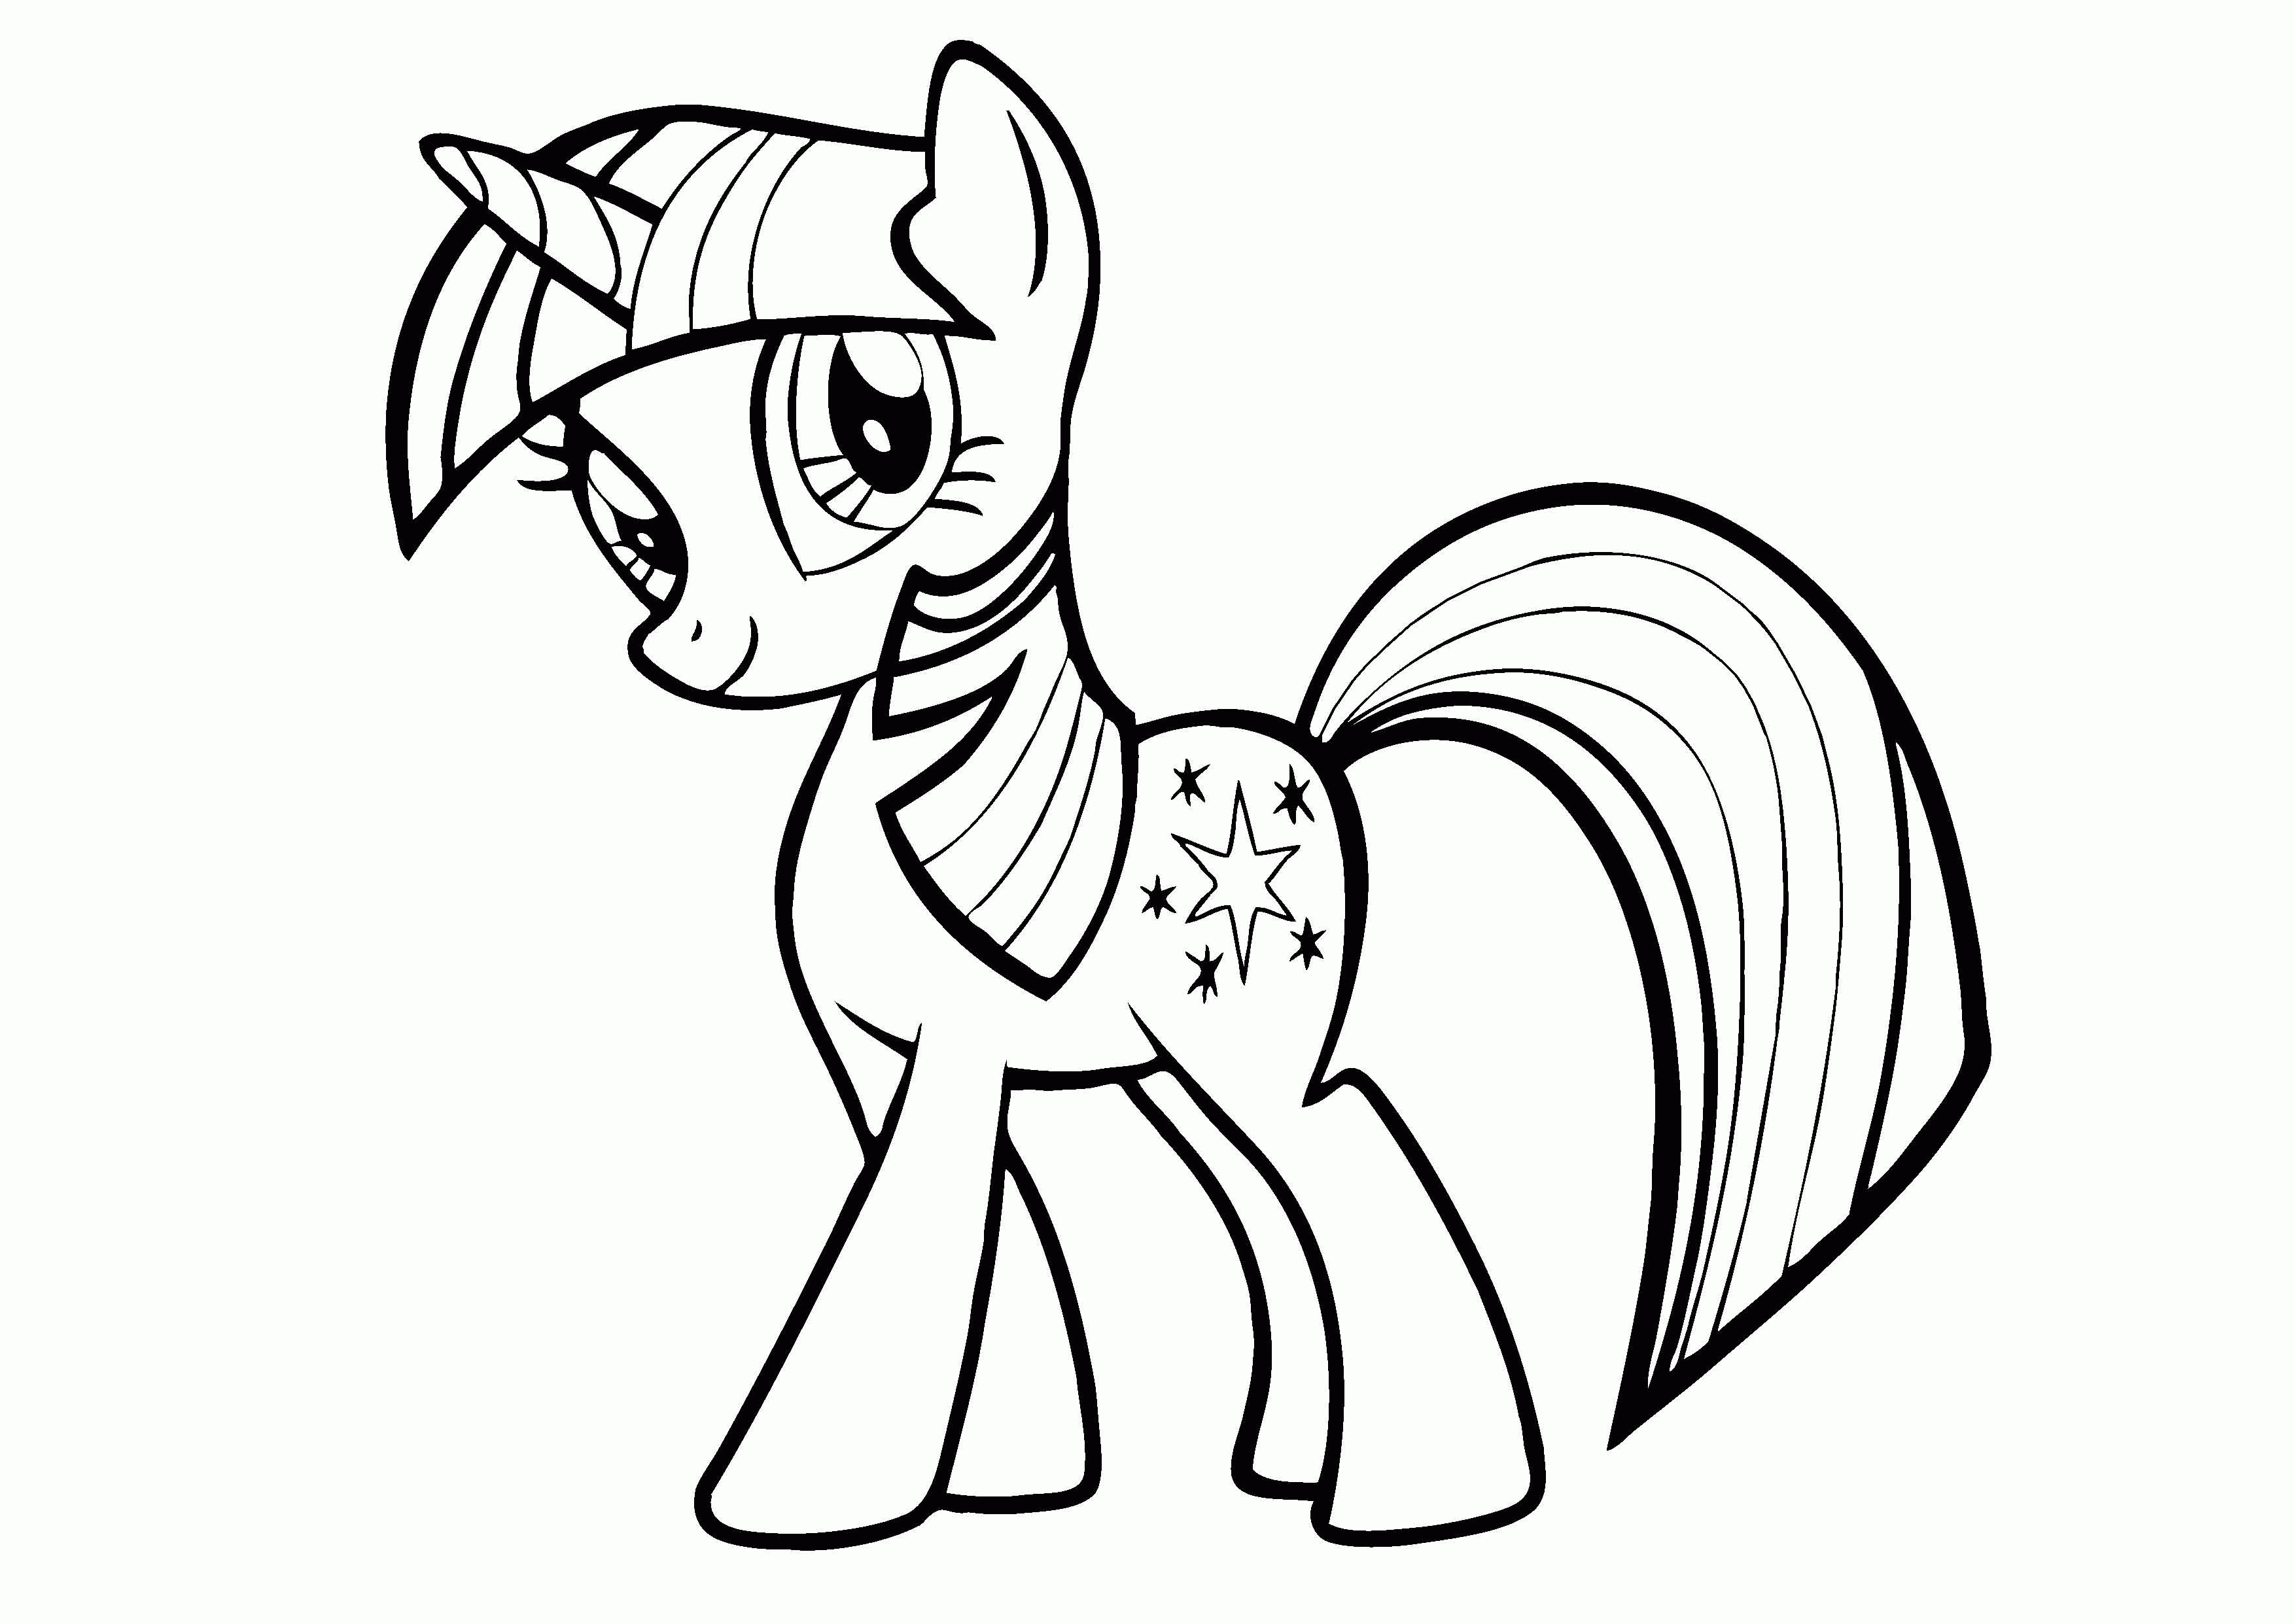 Coloring Pages Printable My Little Pony   Coloring Home - bestcoloring-pages.com